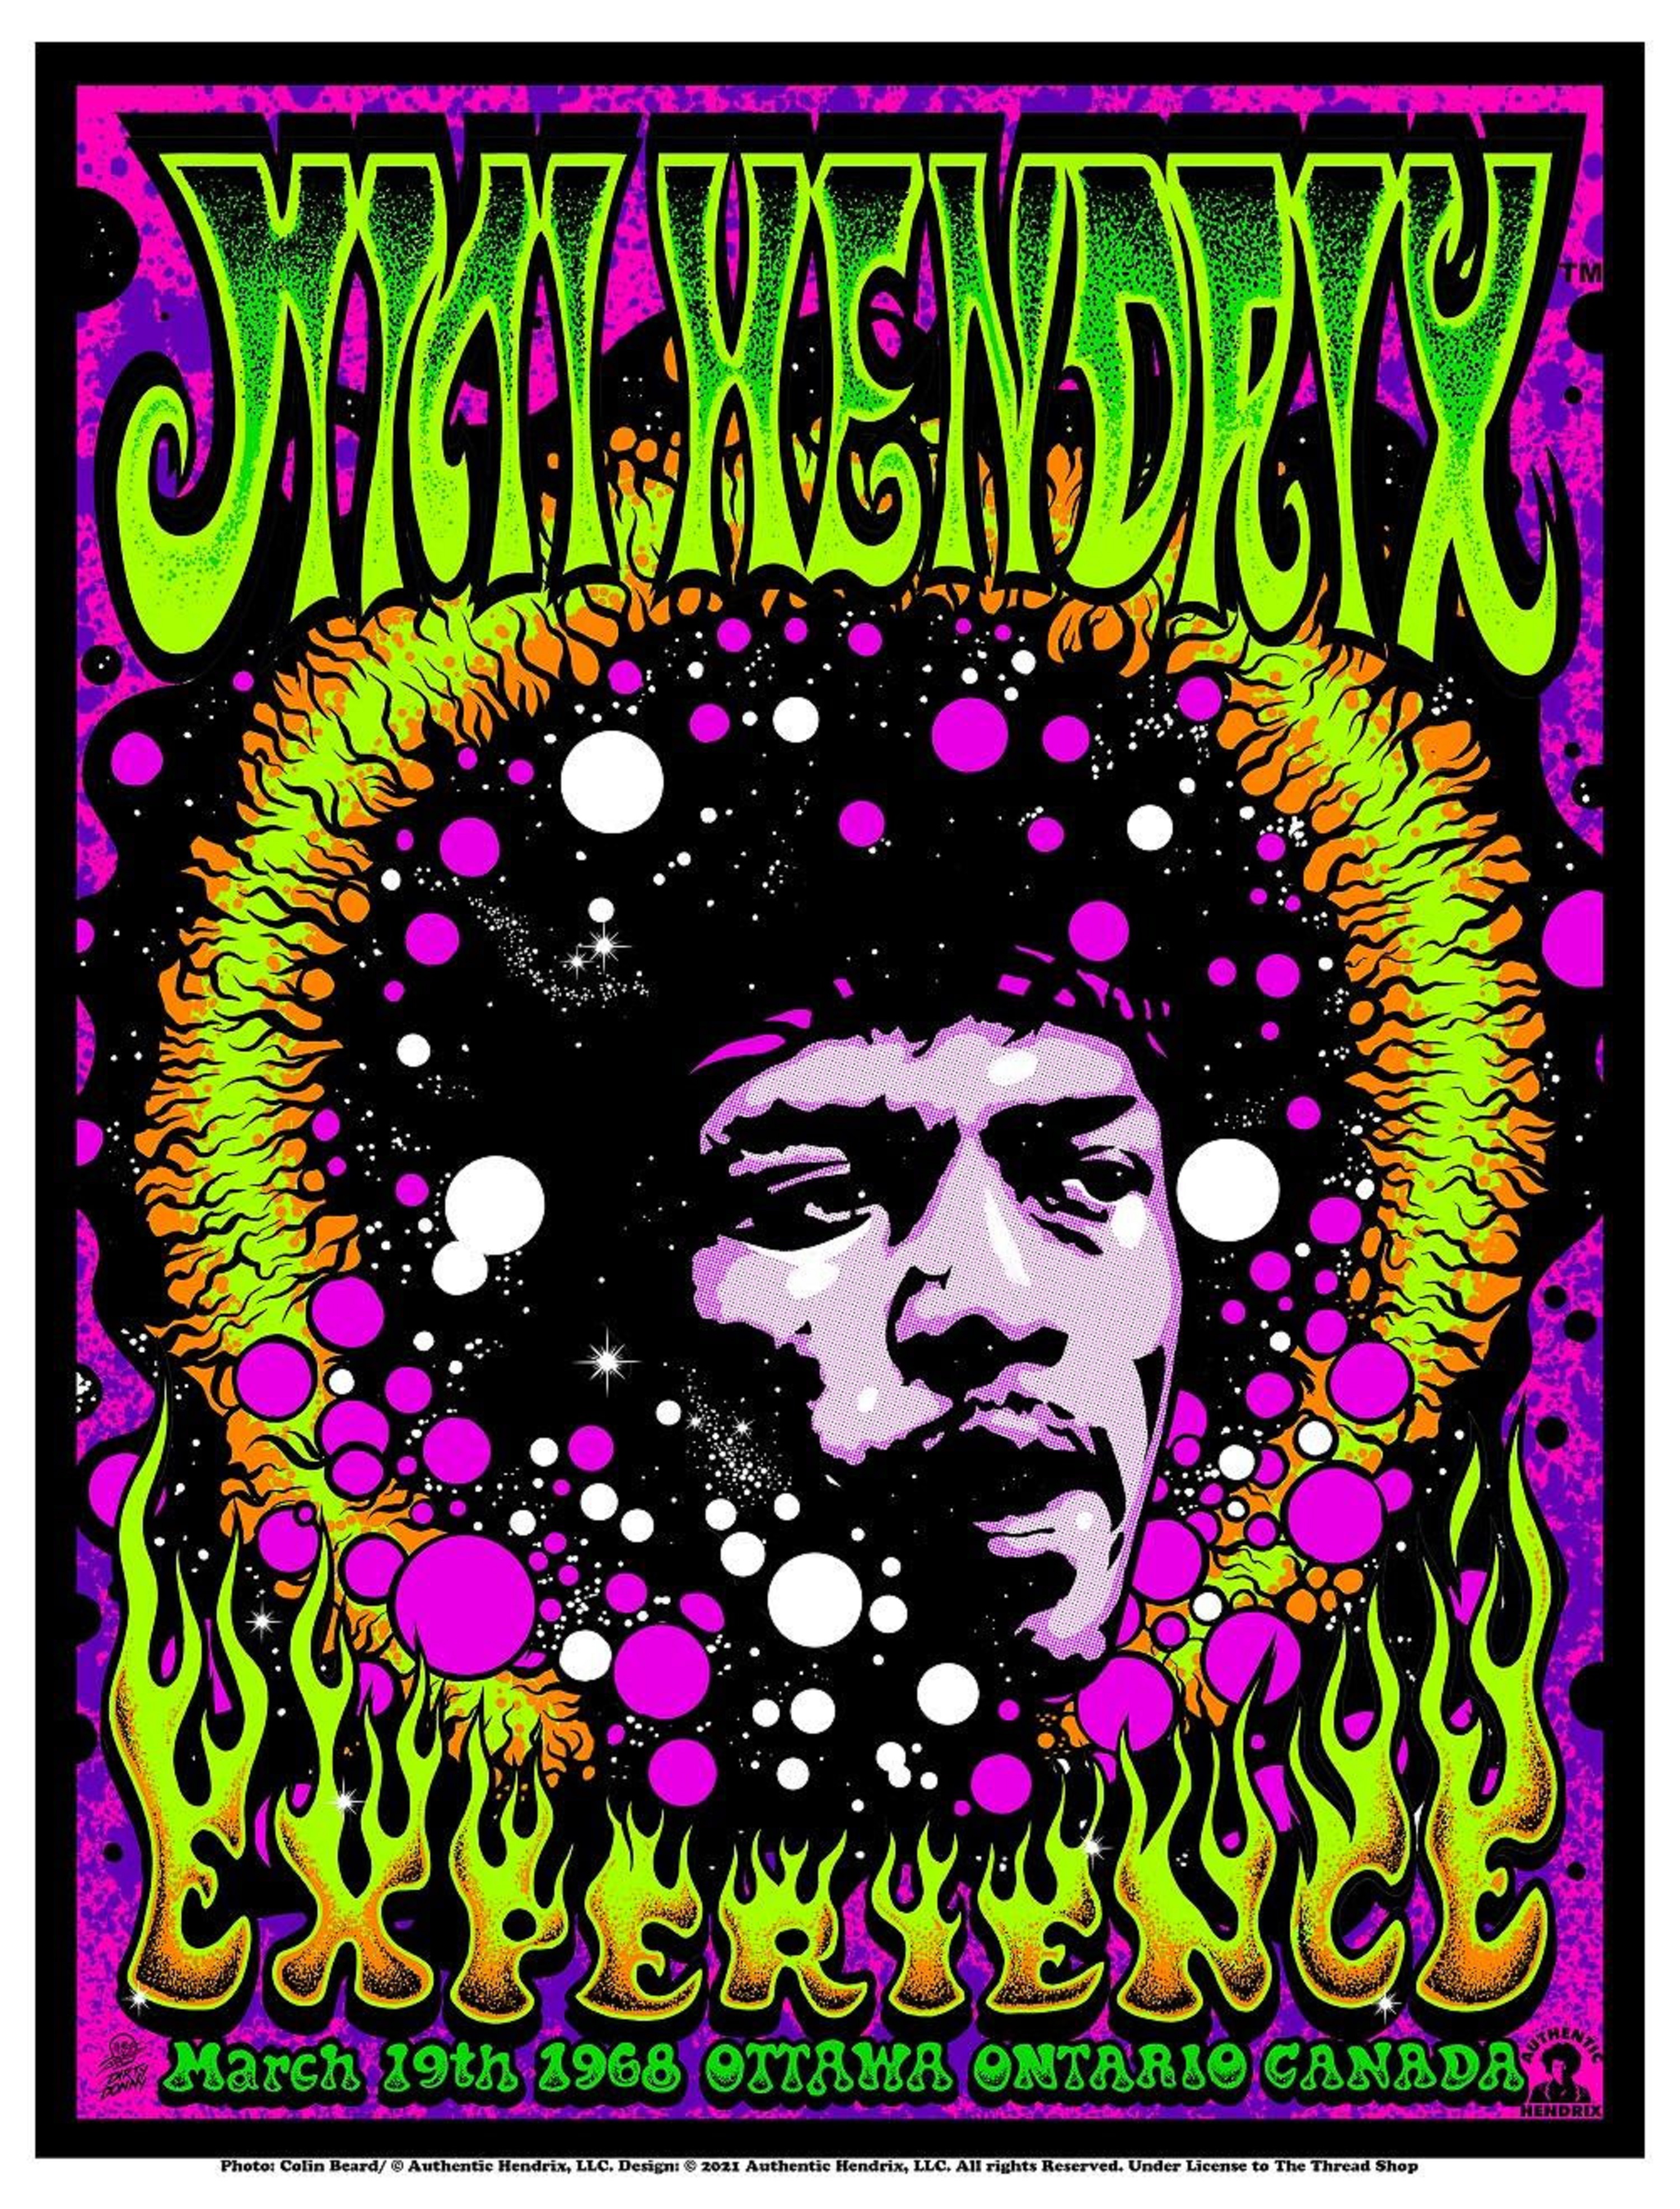 Jimi Hendrix Klaus Voormann 1997 Signed Limited Edition Poster Germany 